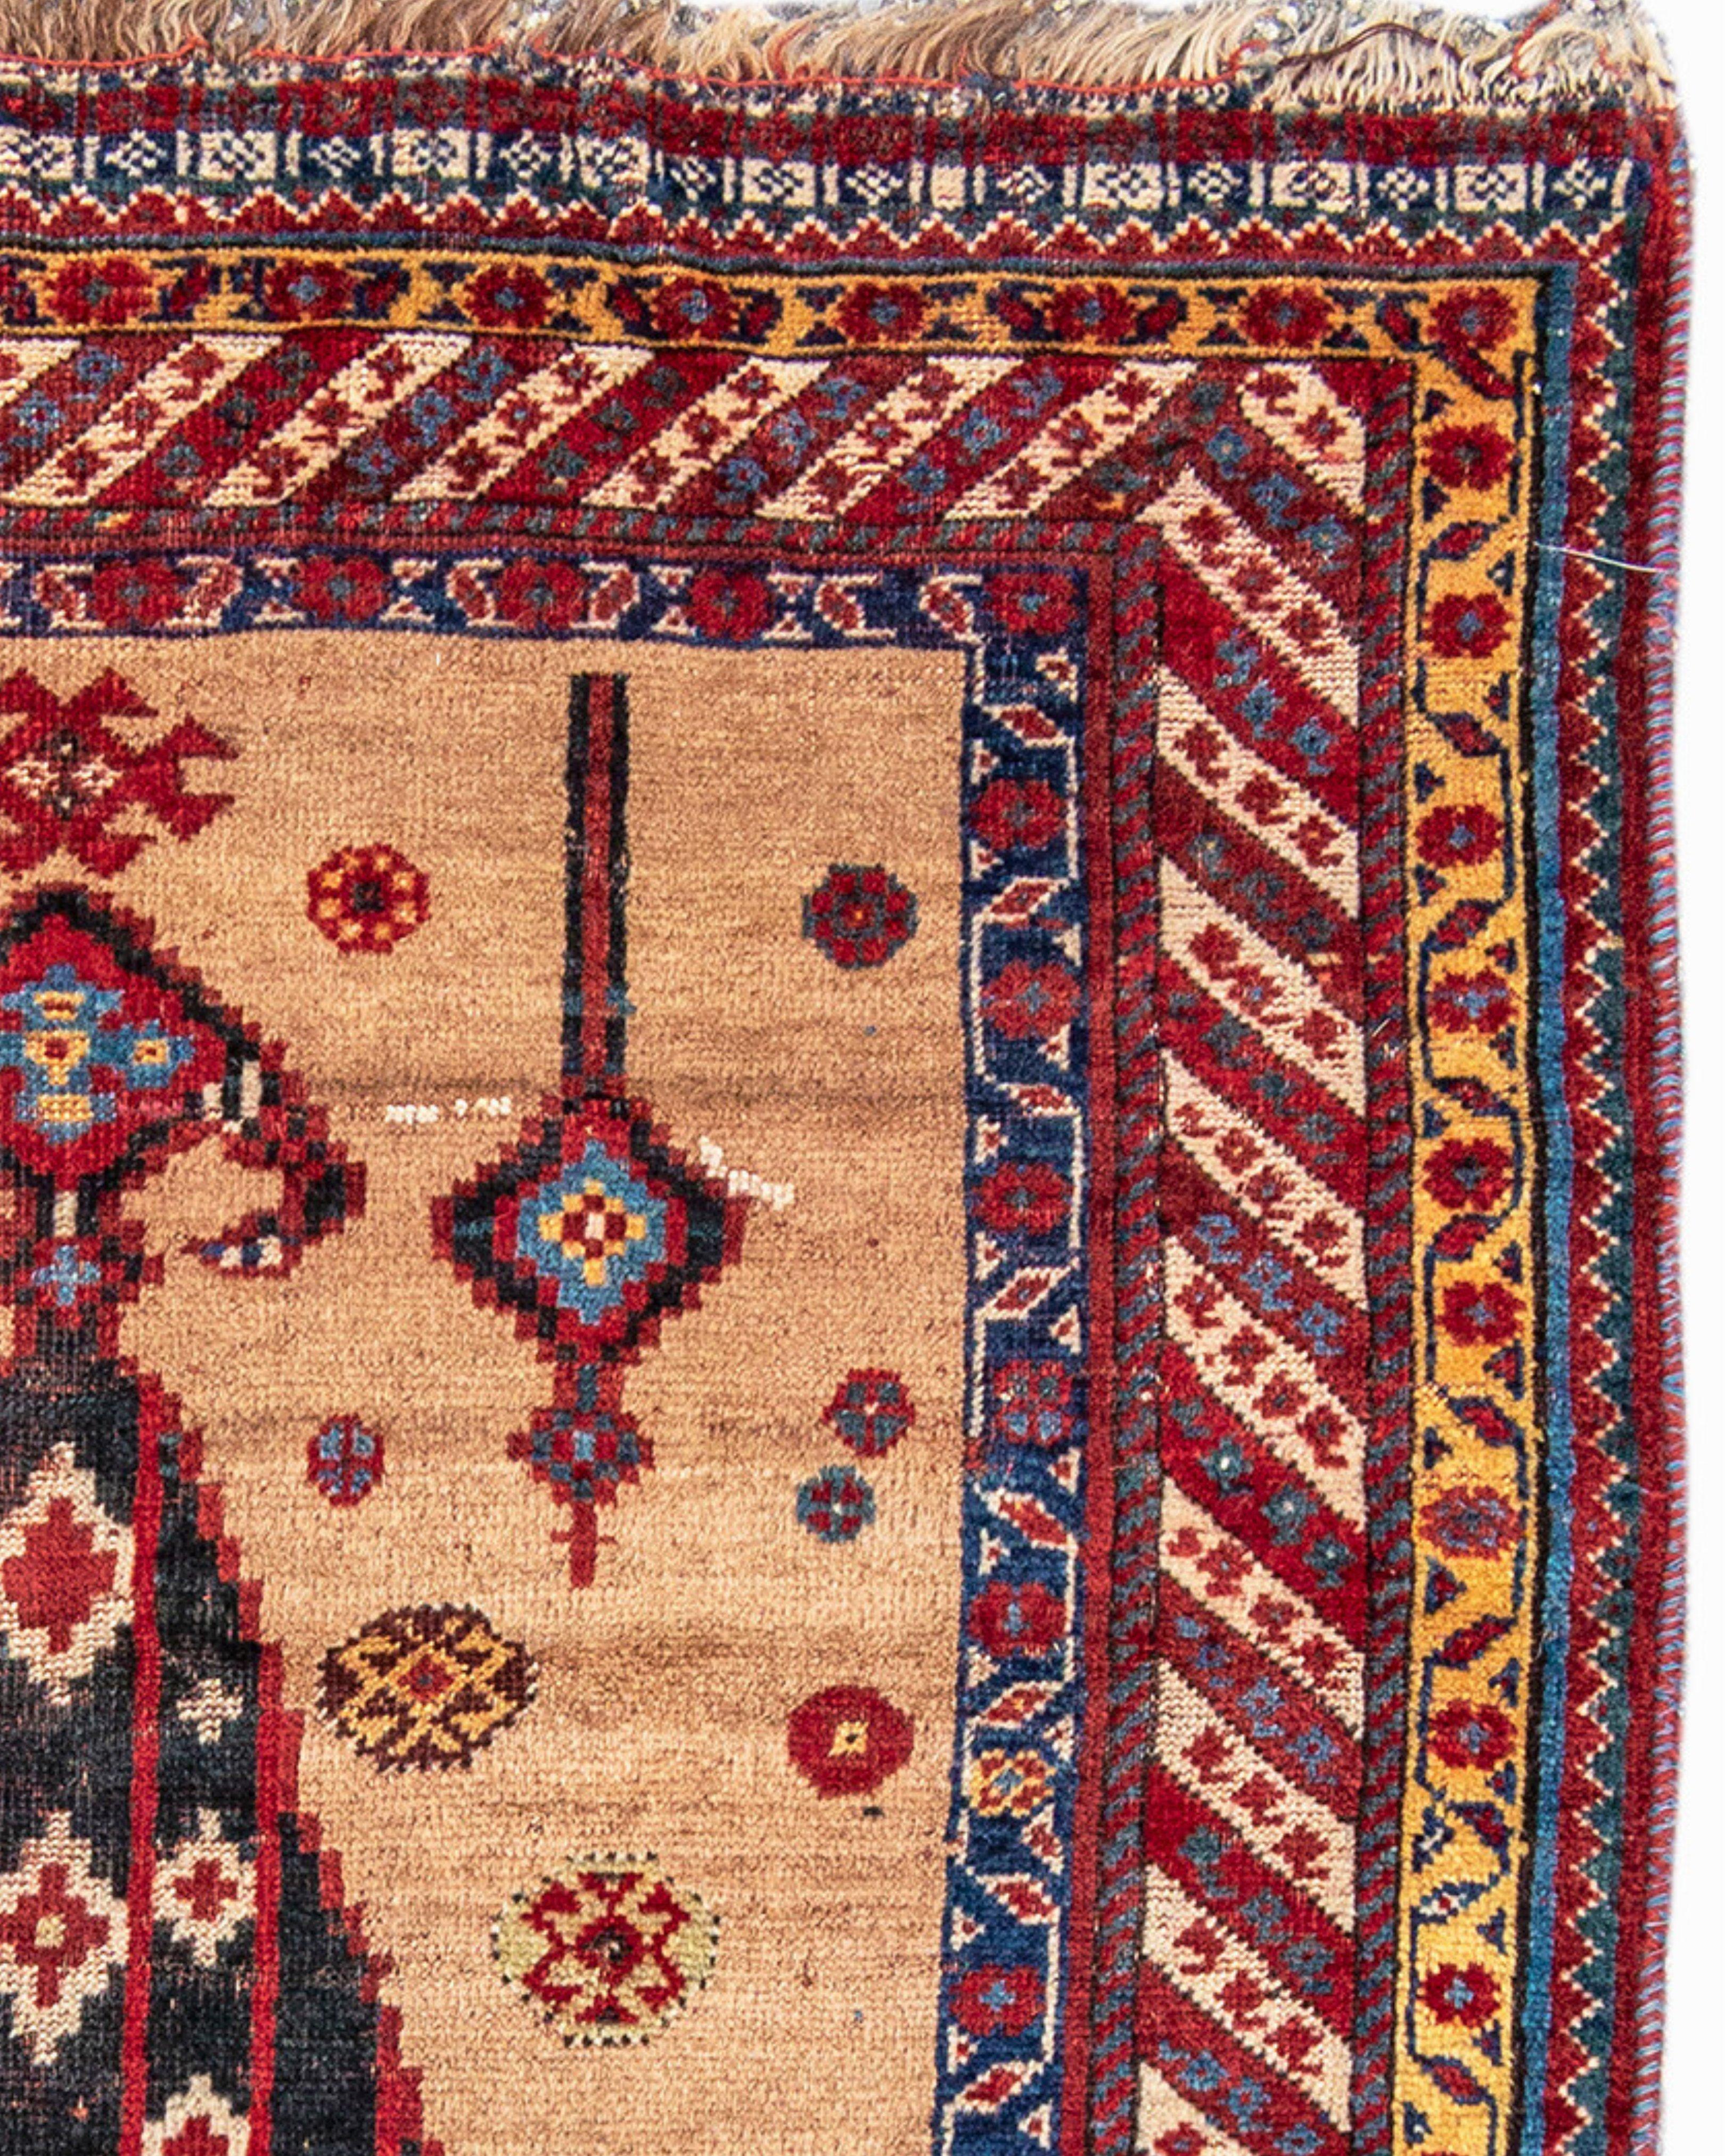 Antique Persian Khamseh Small Rug, Late 19th Century

Ostensibly, for a rug woven by one of the constituent tribes of the Khamseh Confederacy, this design is rare, if not unique. Woven with a camel wool ground (a rare feature), the field pattern